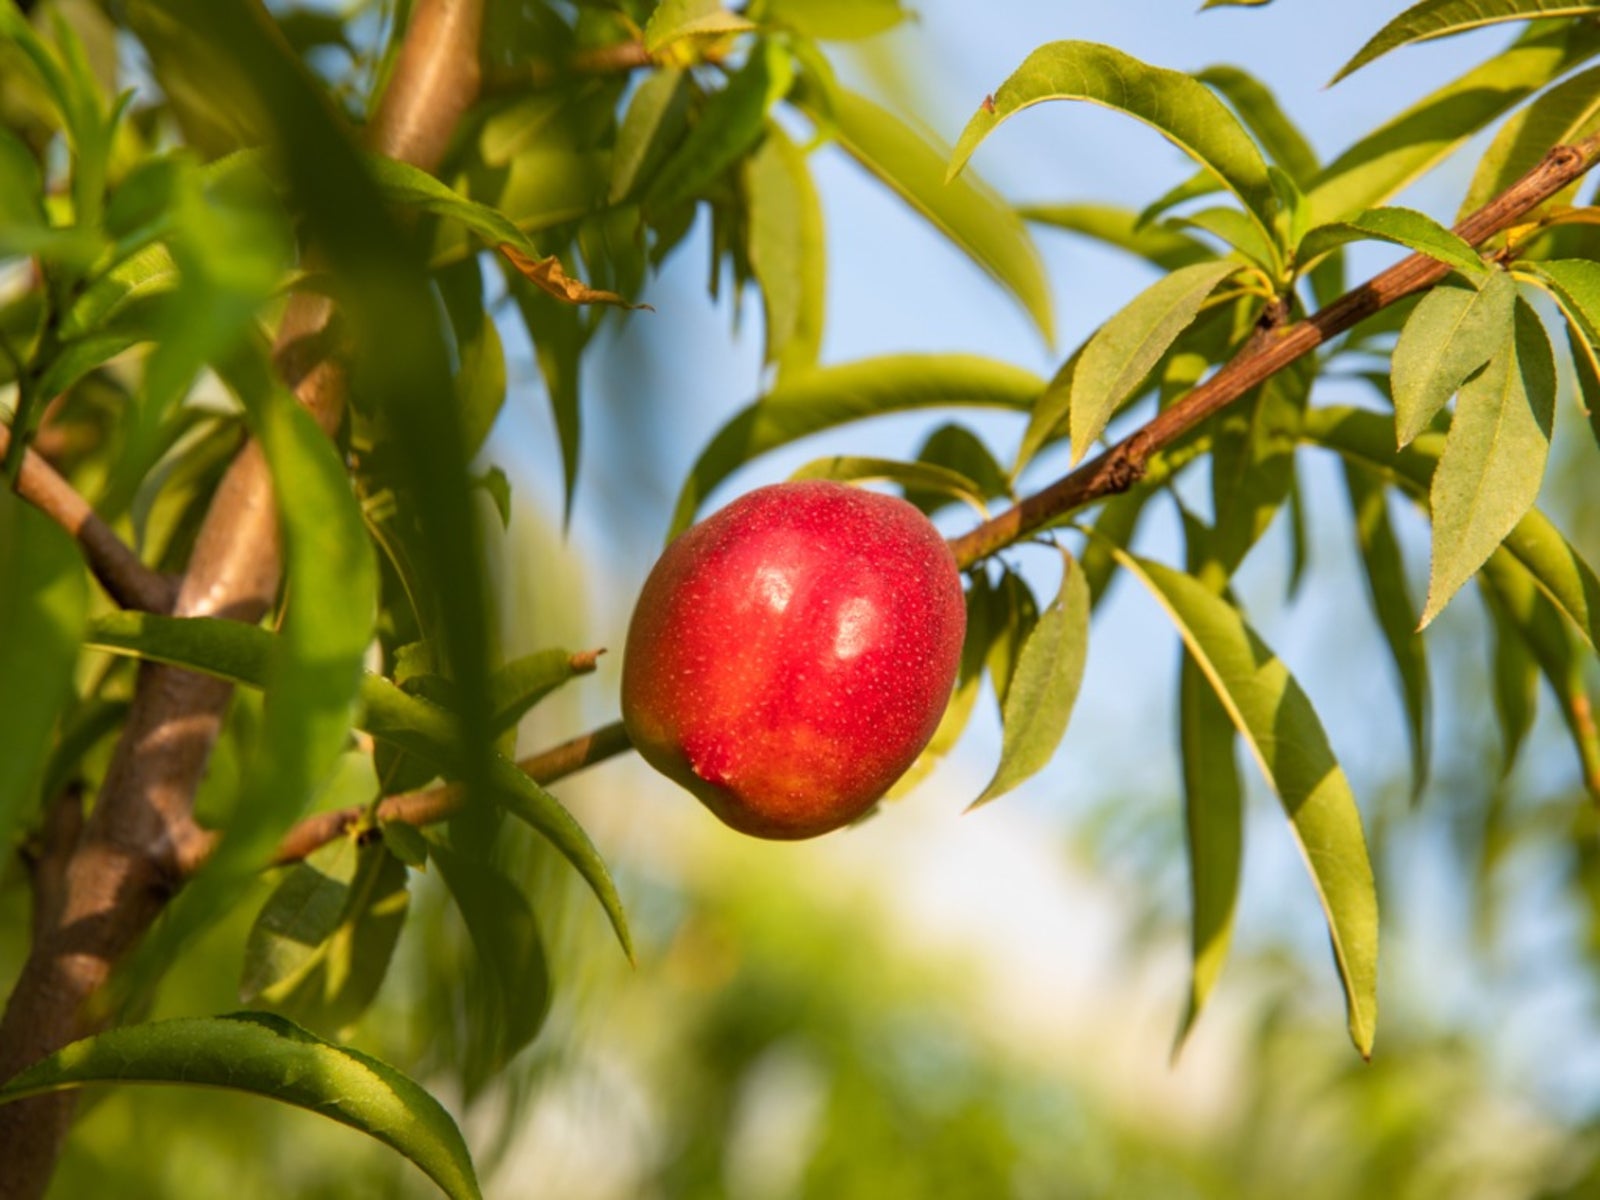 Learn About Nectarines and How to Use Them